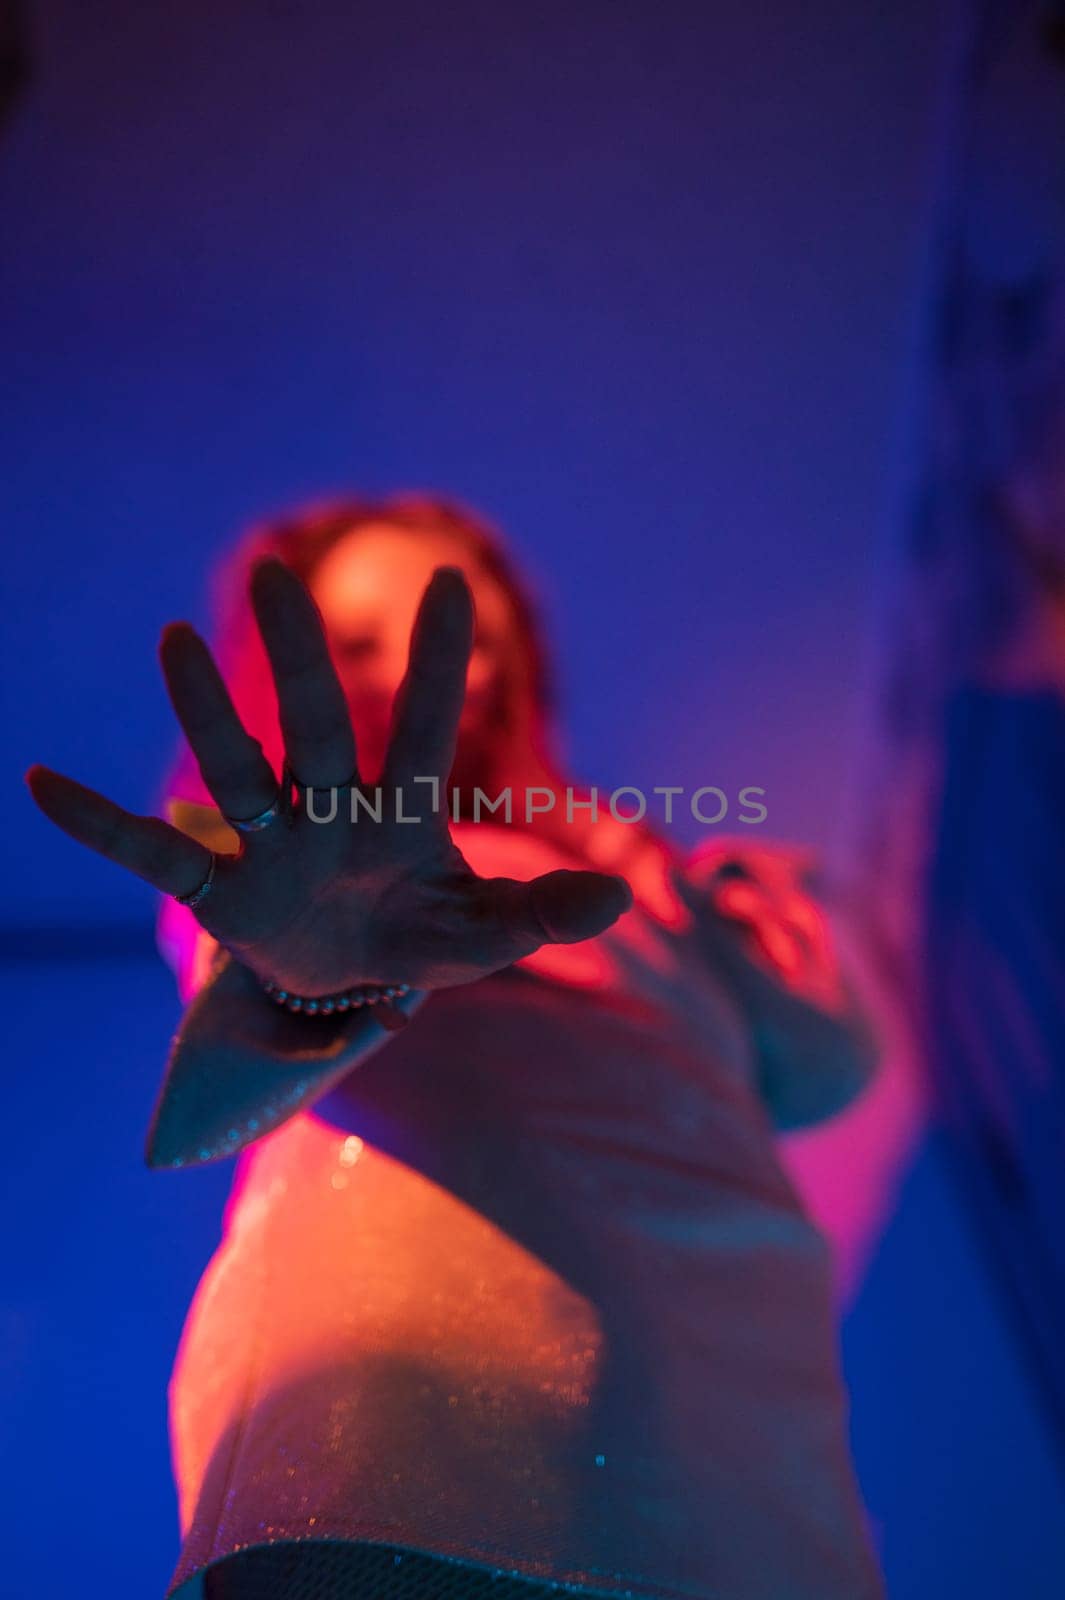 Woman hand closeup with neon color background